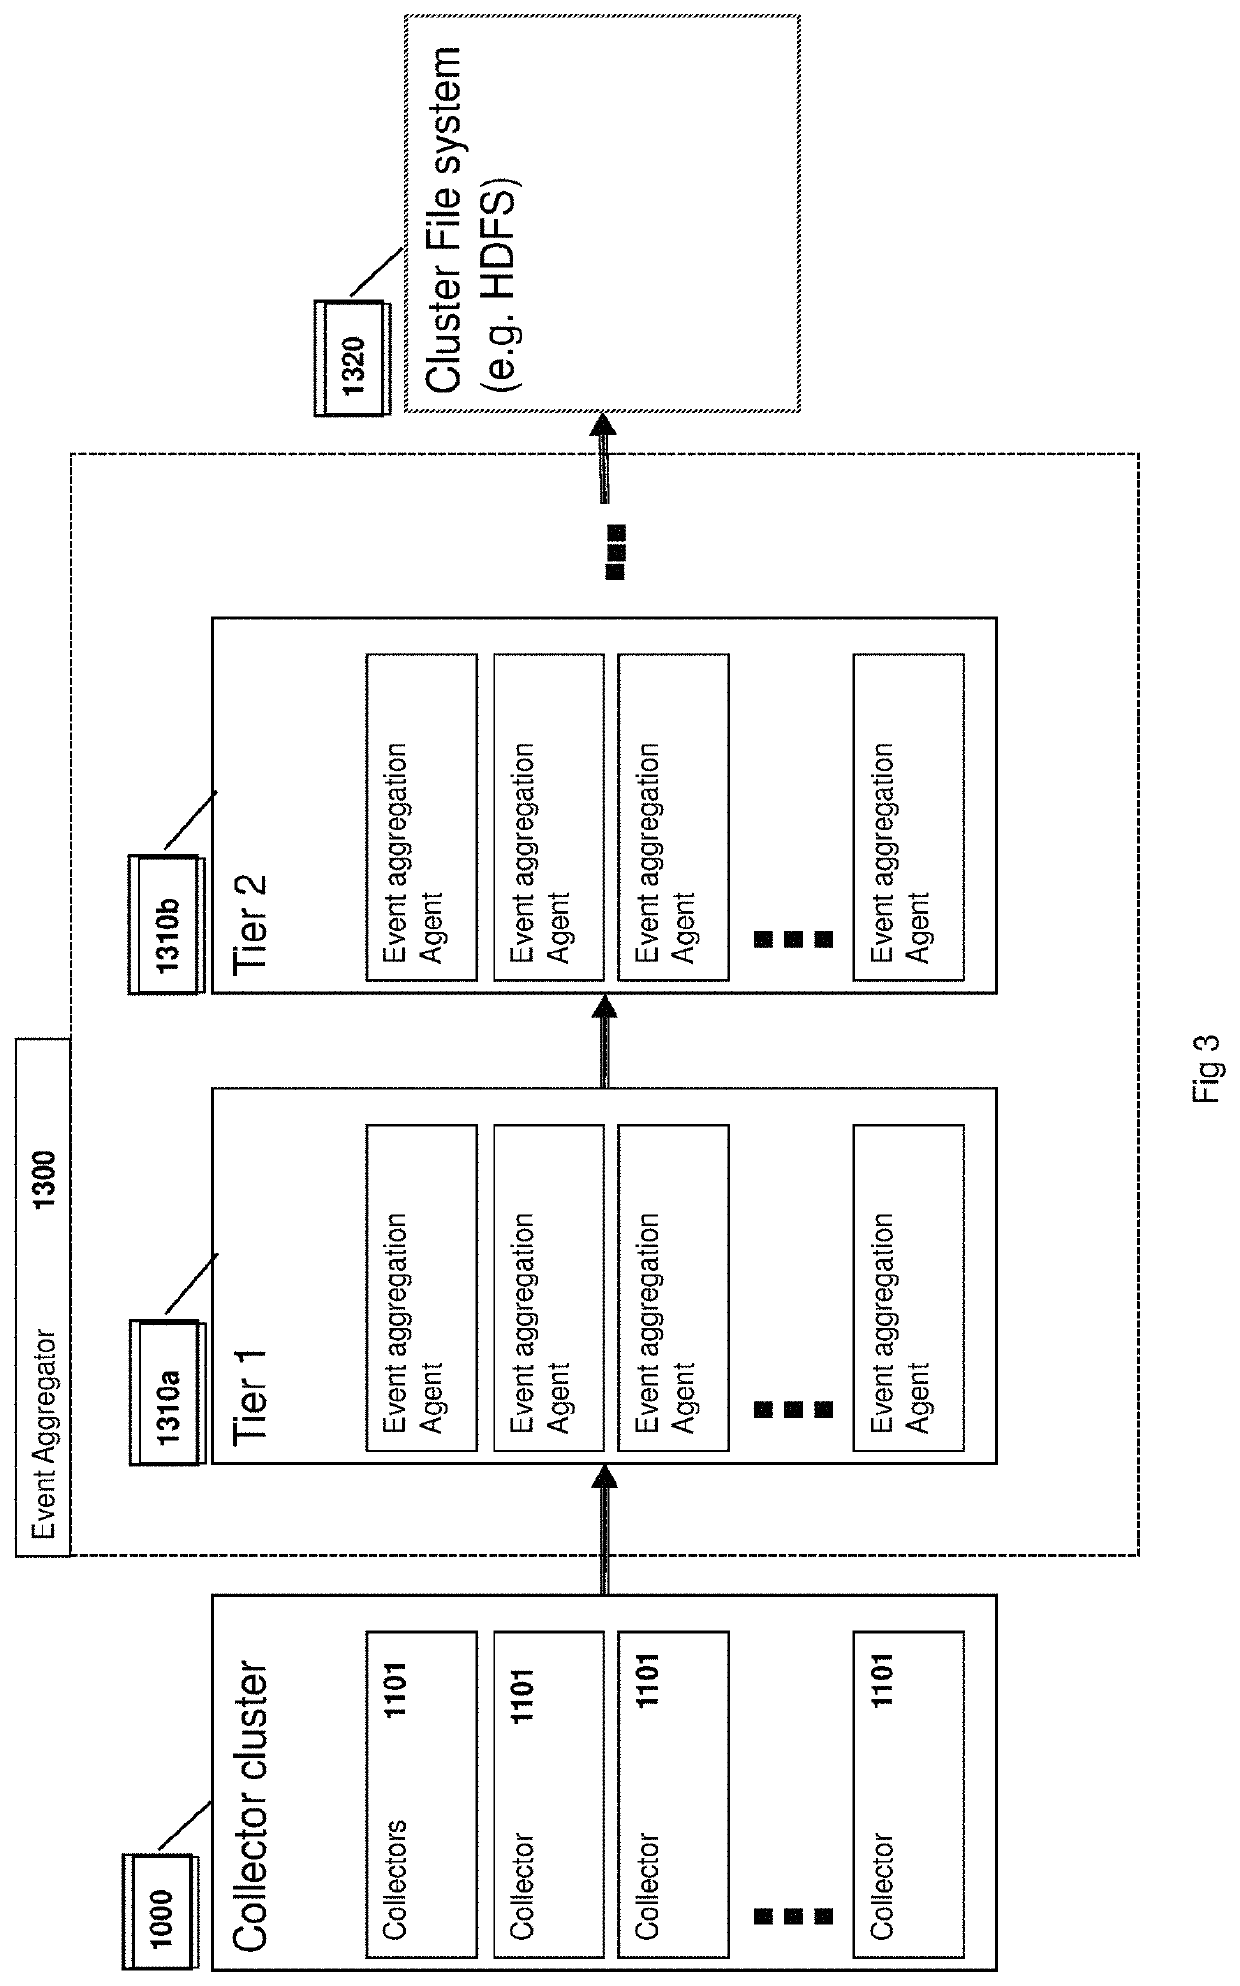 System and method of analyzing and authenticating scenarios and actions that are taking place in a plant or a factory